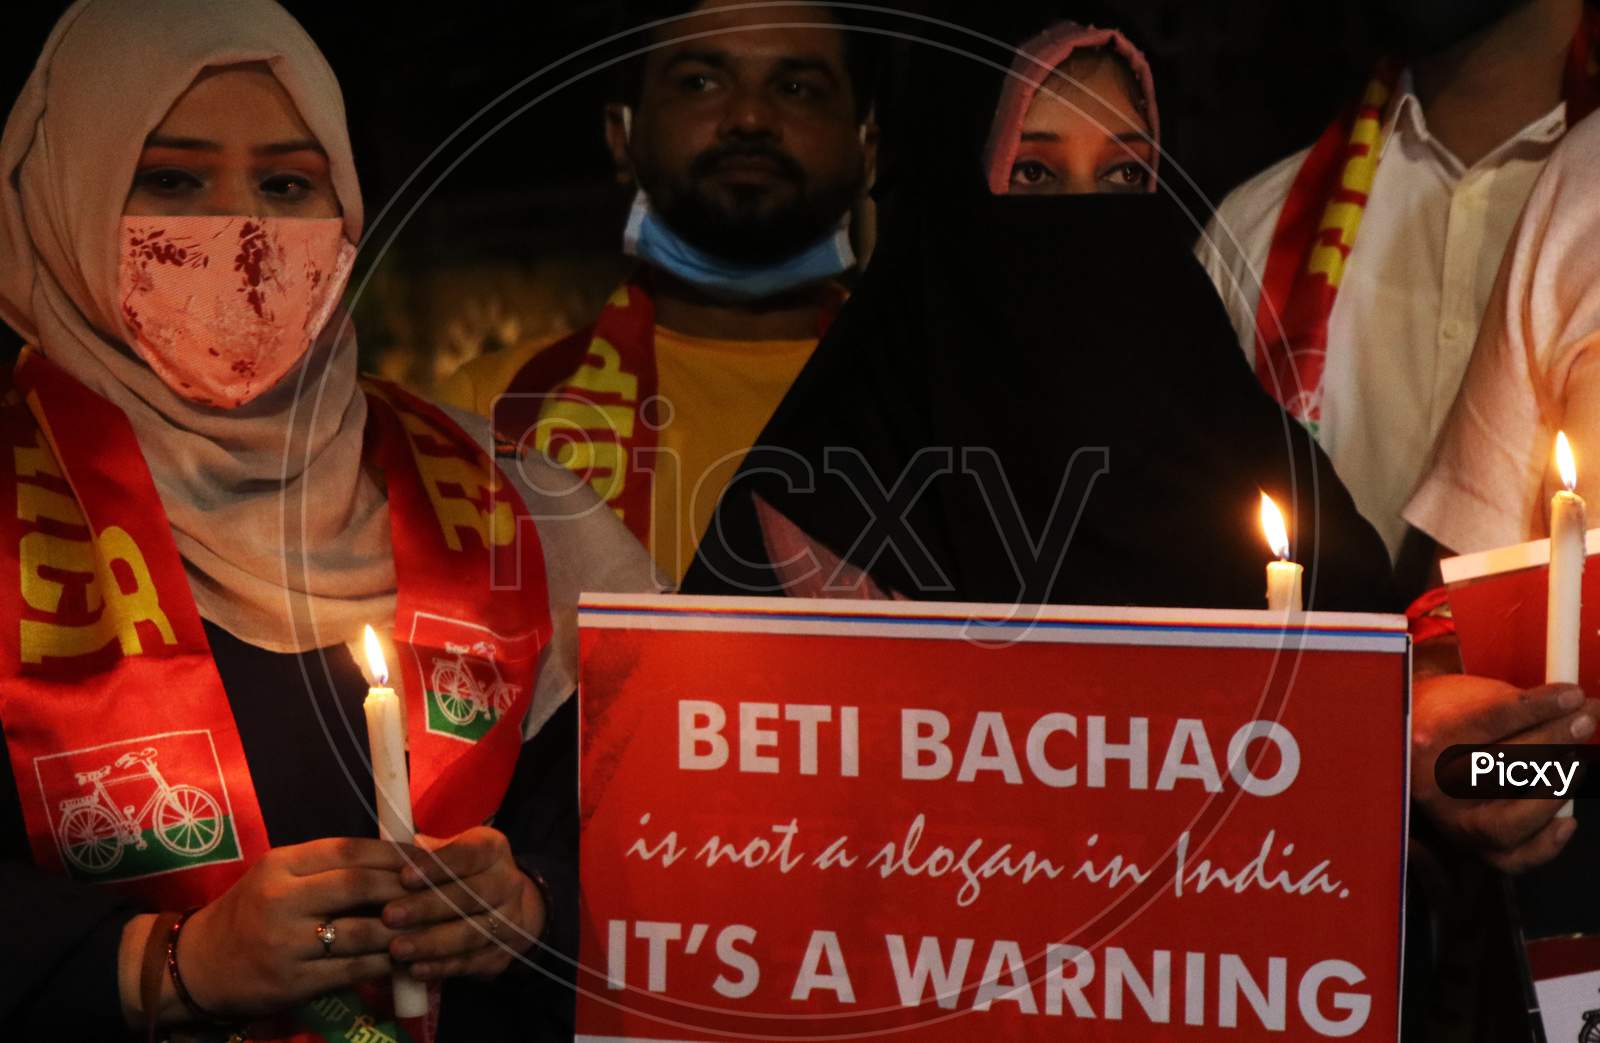 Women hold placards during a protest after the death of a rape victim, on a street in Mumbai, India, September 30, 2020.